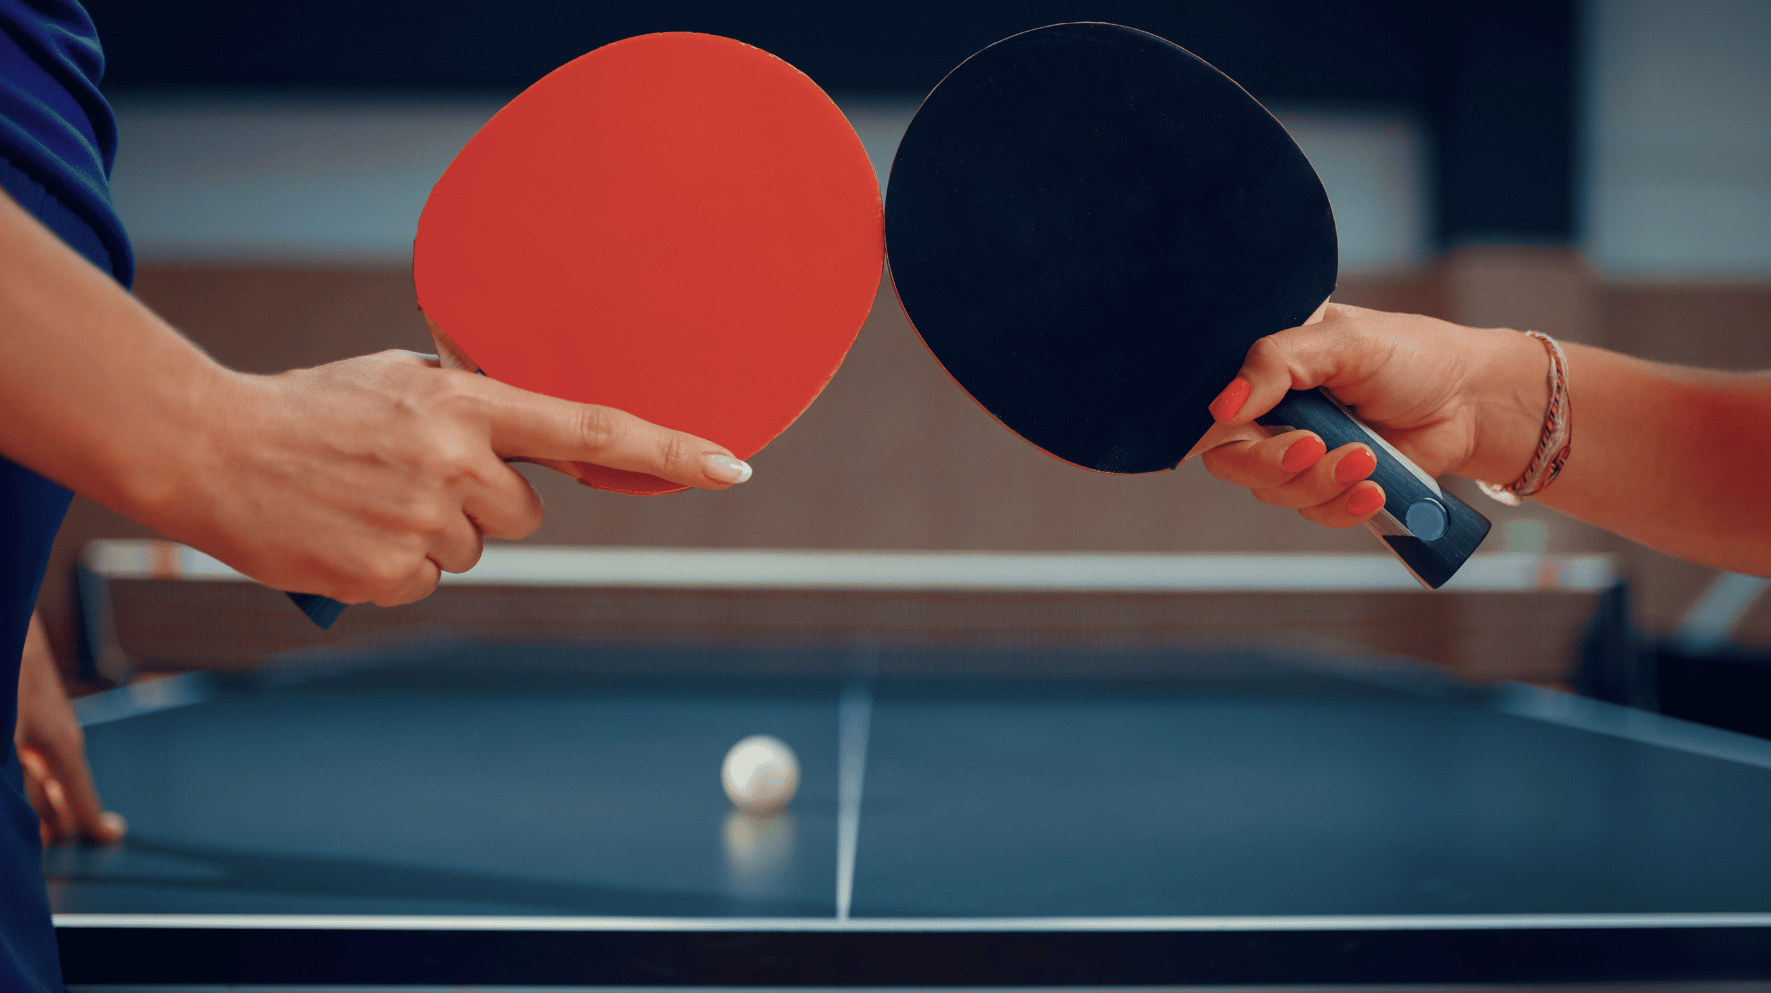 image of two table tennis rackets held up by two different hands with a table tennis ball sitting on a table tennis table in the background